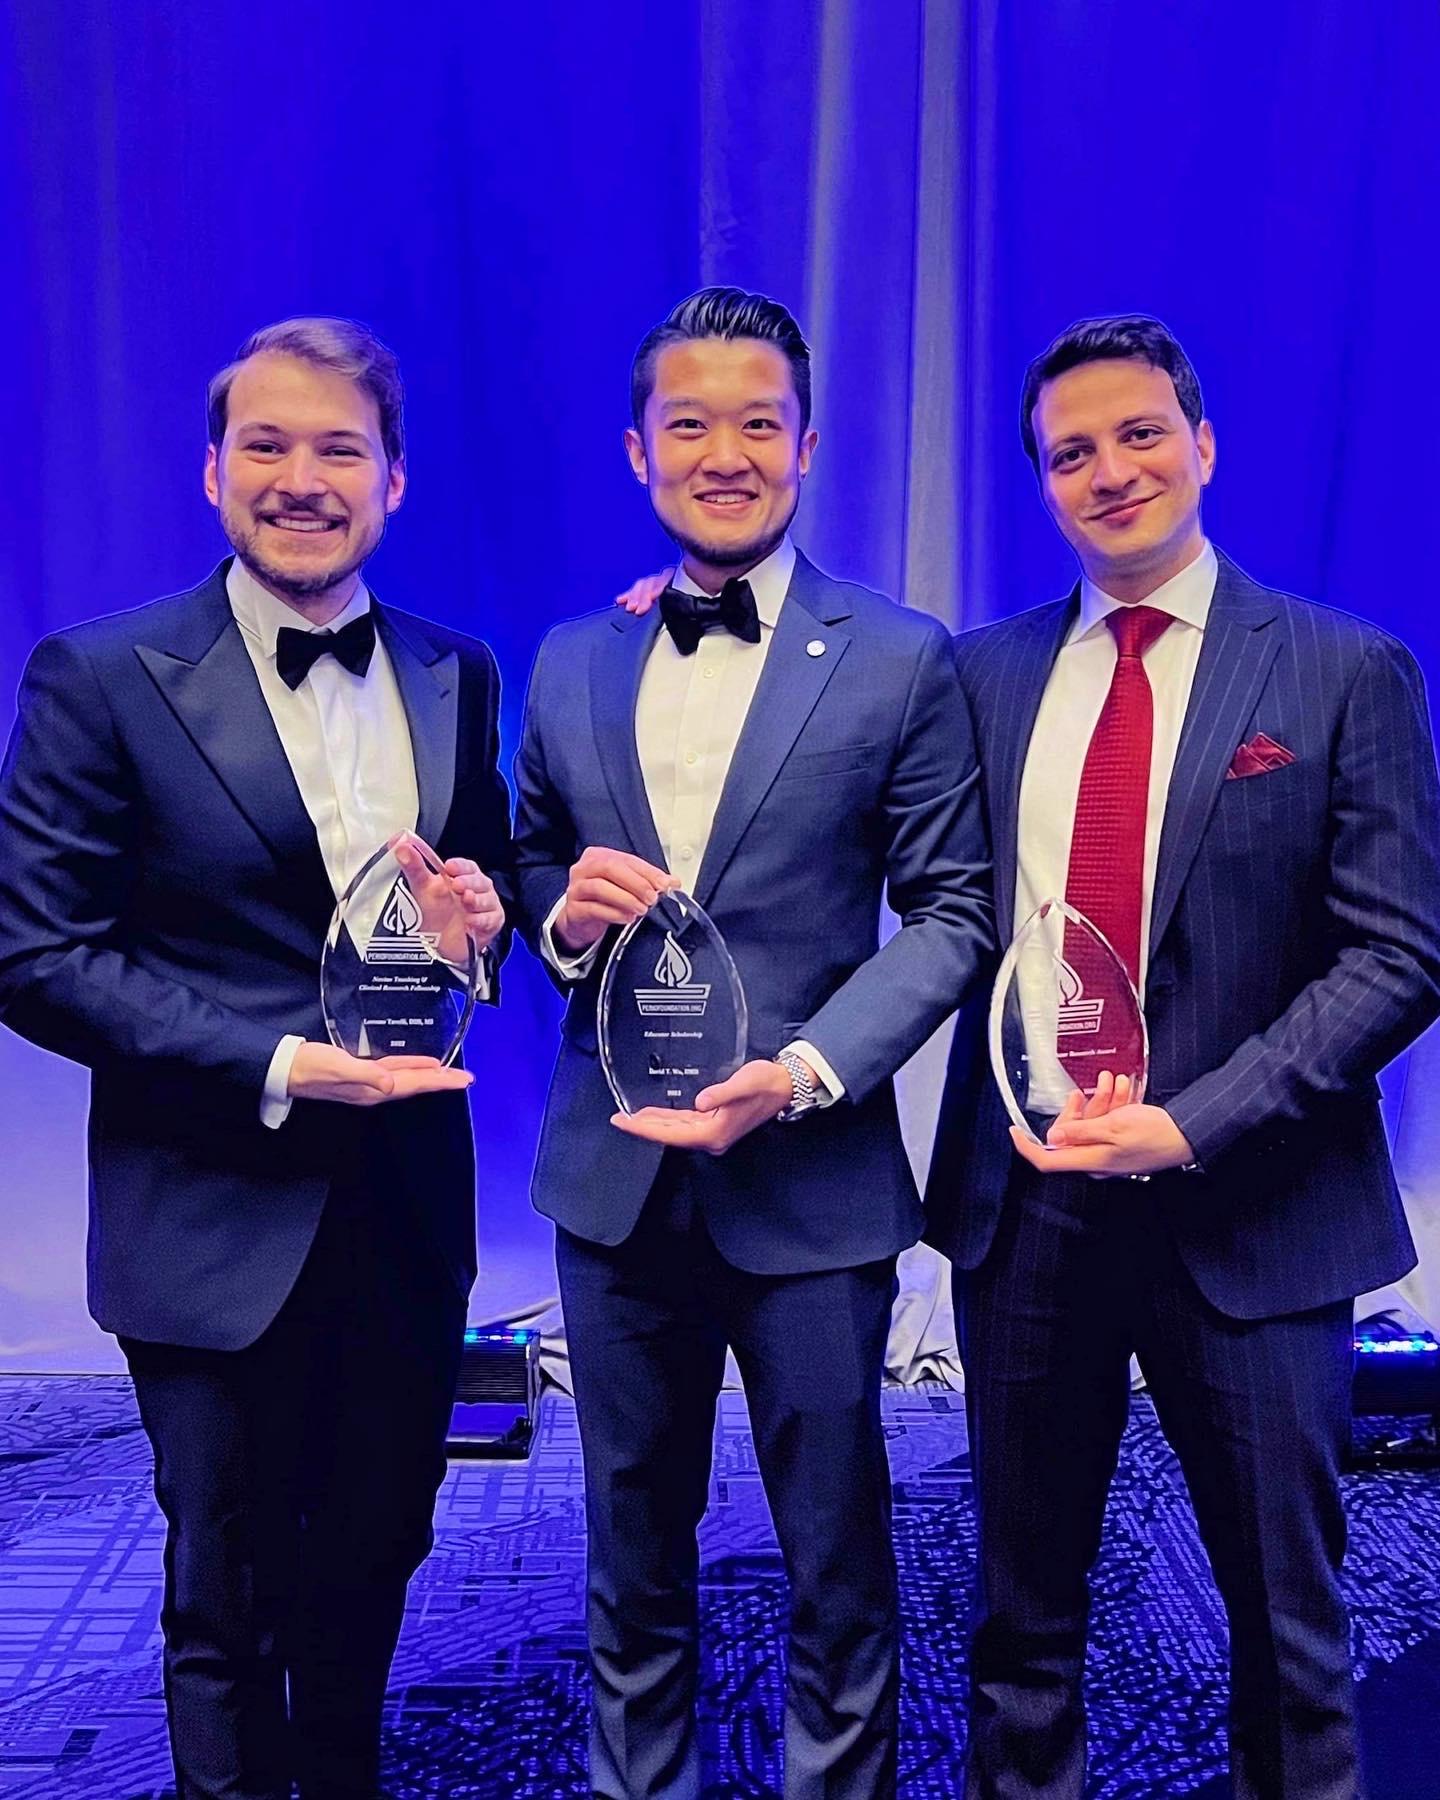 Three people dressed in suits holding glass awards